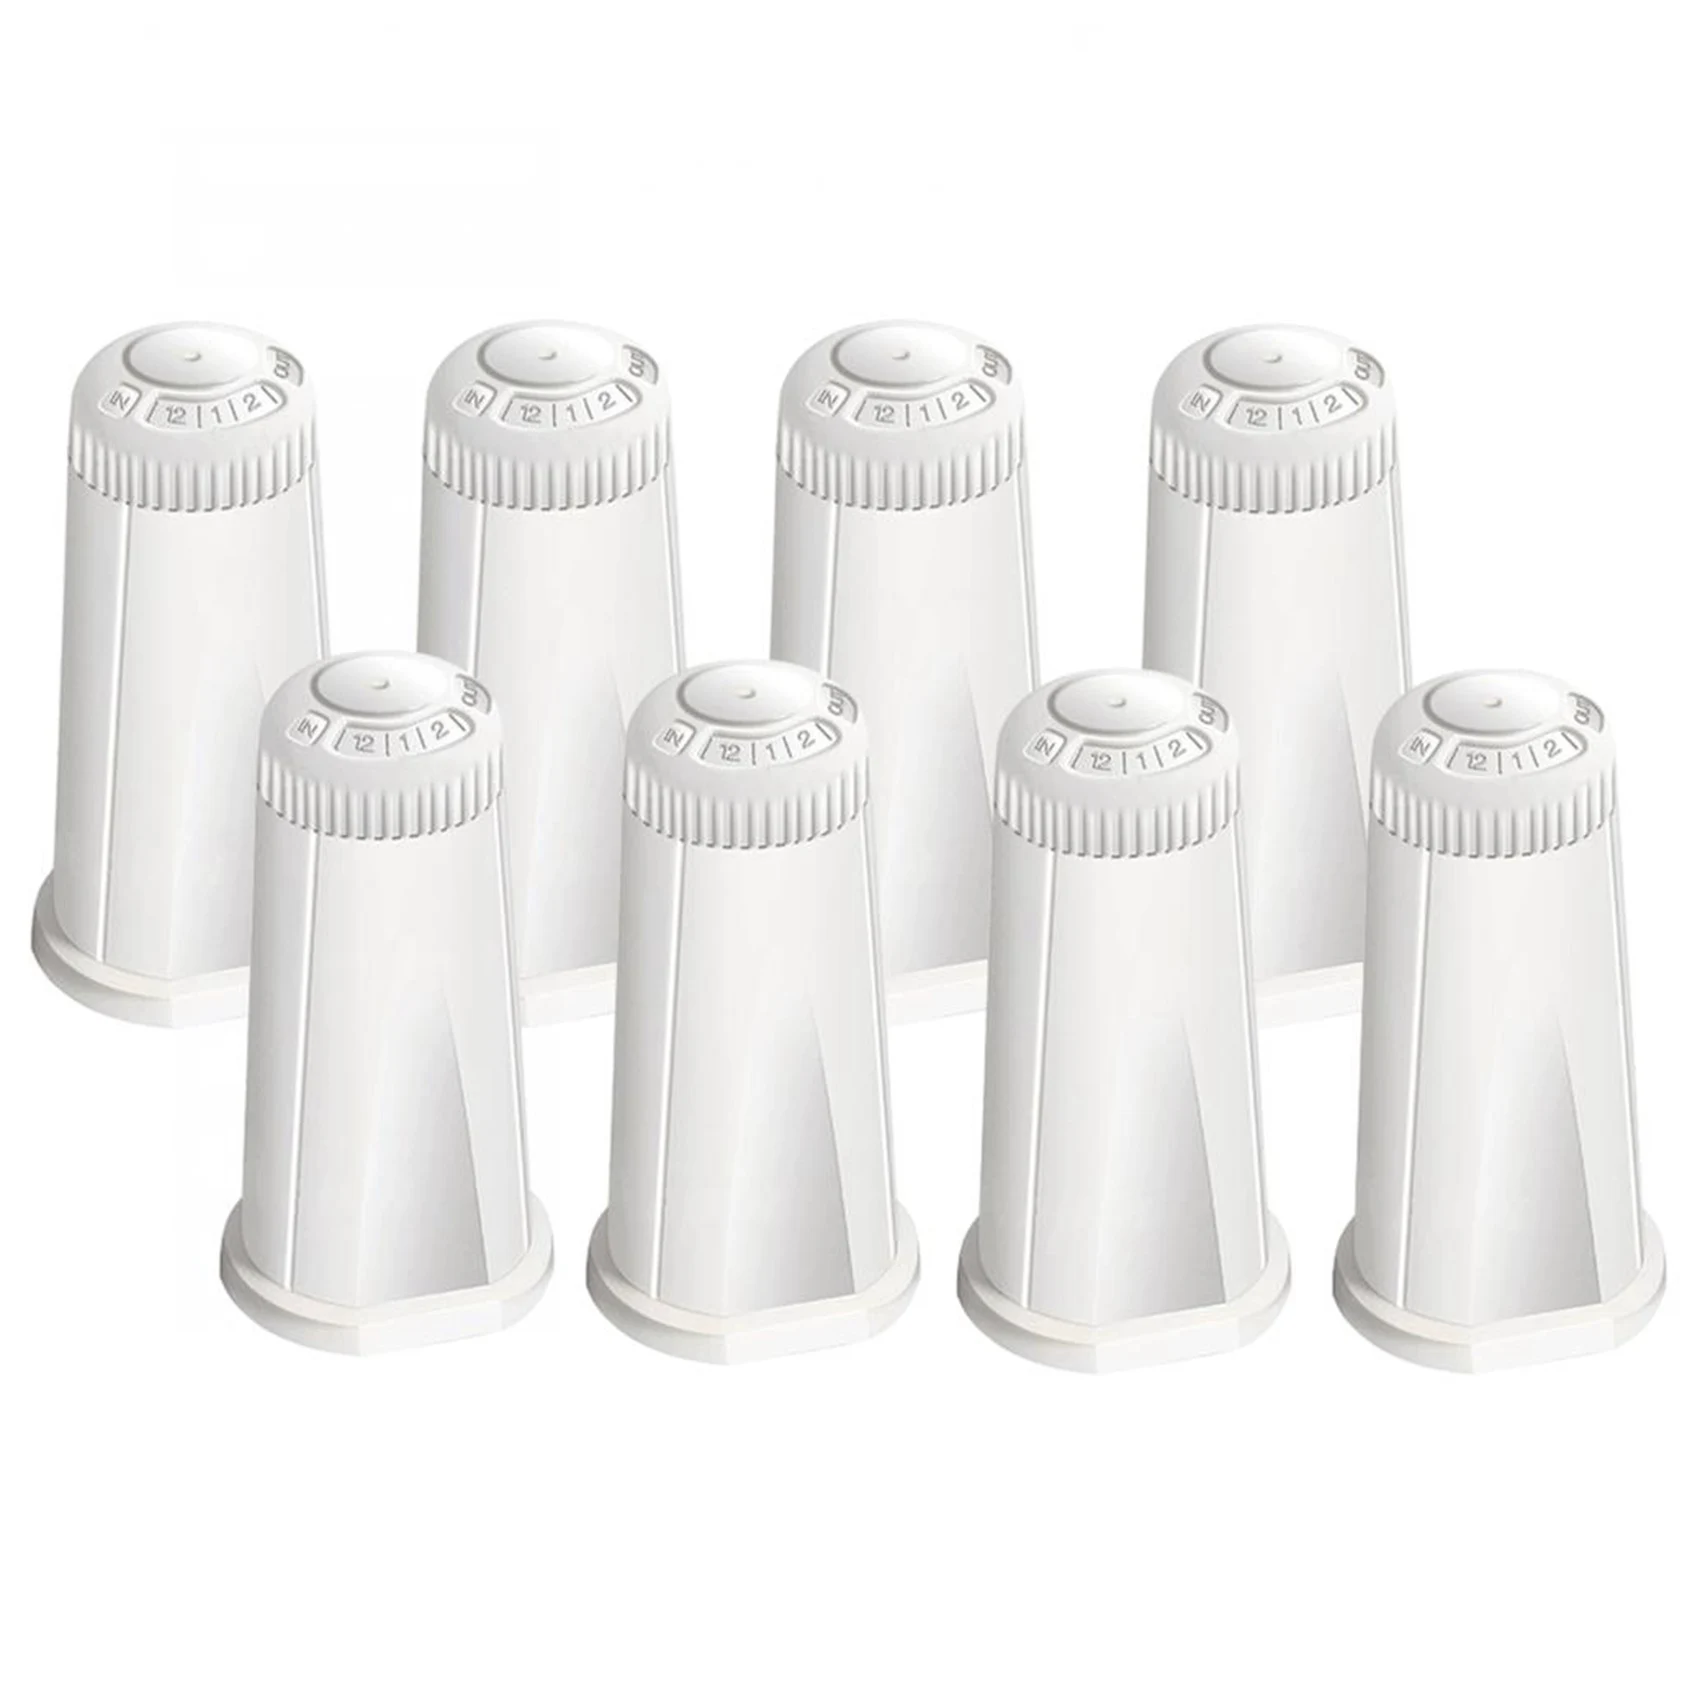 

8Pcs Replacement Water Filter for Breville Claro Swiss Espresso Coffee Machine - Compare to Part BES008WHT0NUC1